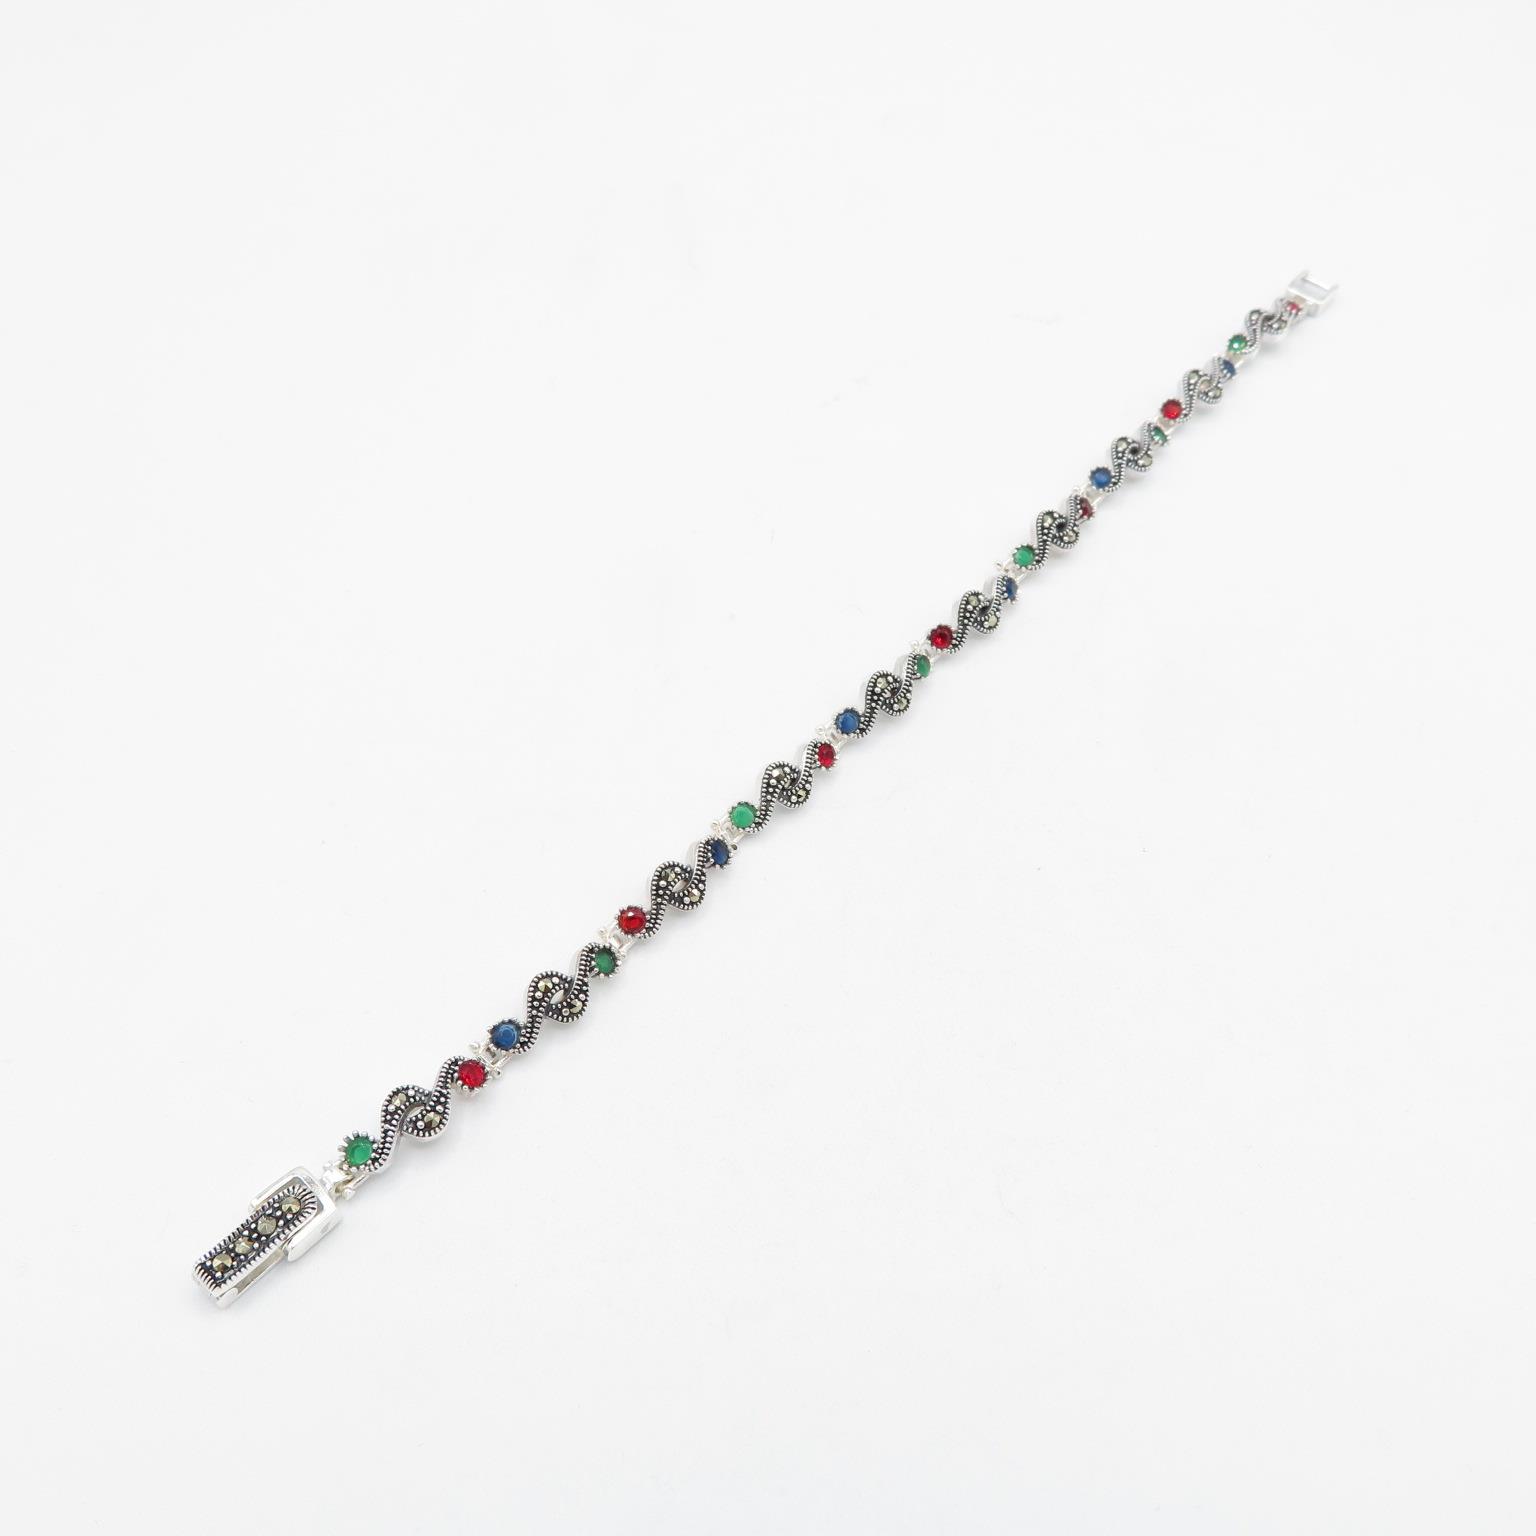 HM 925 Sterling Silver bracelet set with green, blue and red stones (12g) in excellent condition -